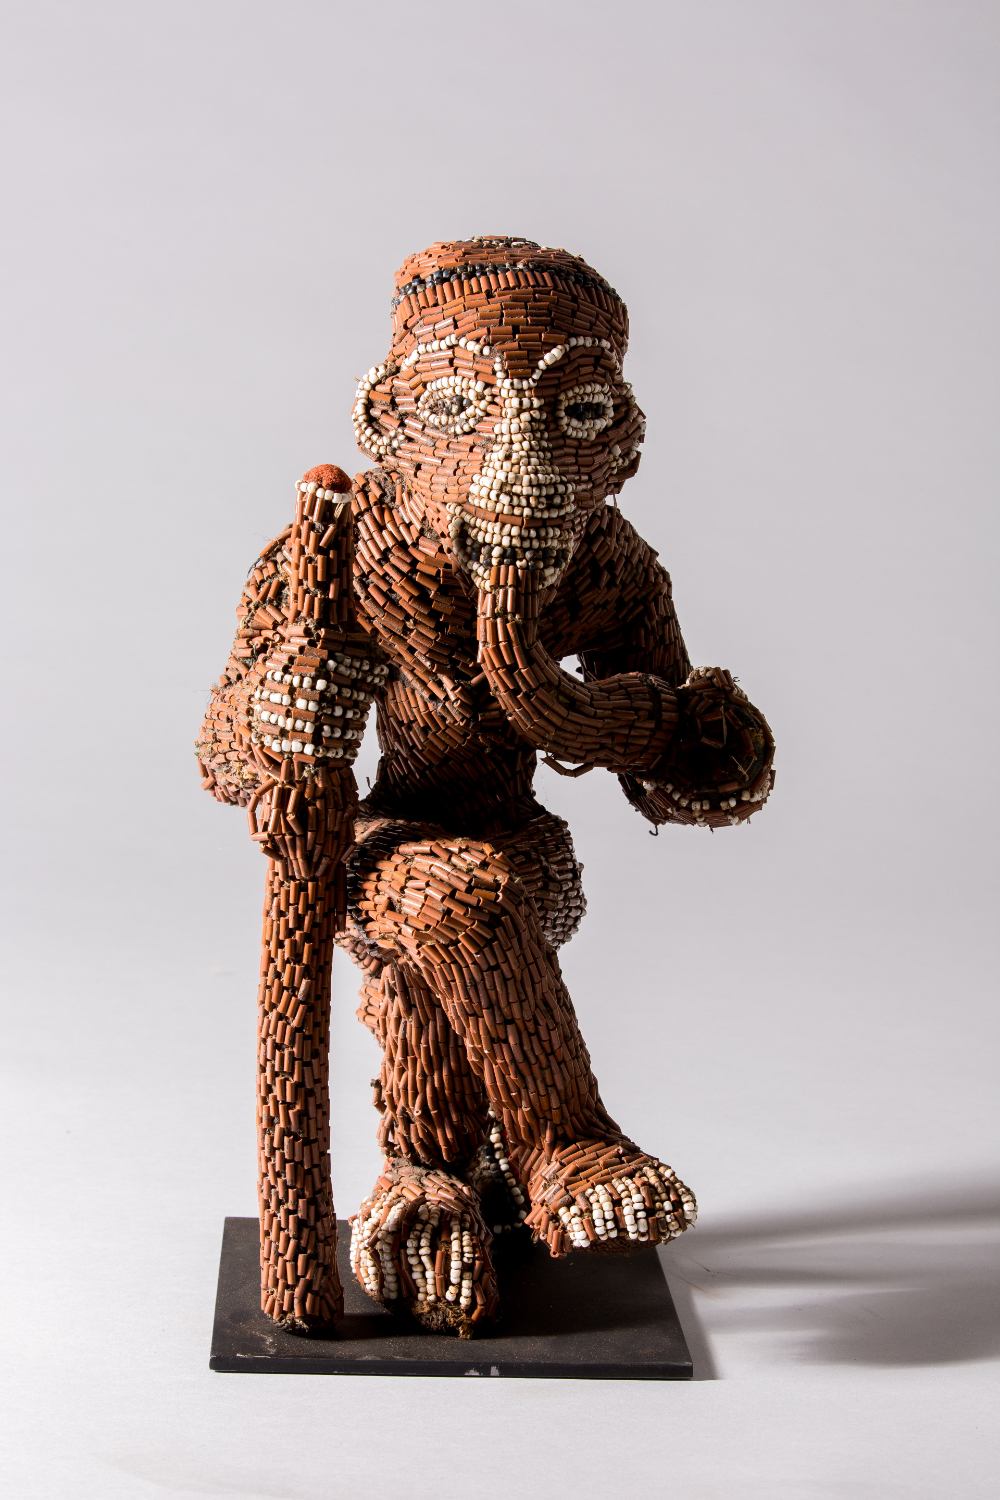 thumbnail of Seated Commemorative Figure from Western Grassfields: Bamileke: Dschang. medium: Wood, beads, thread. date: 20th century